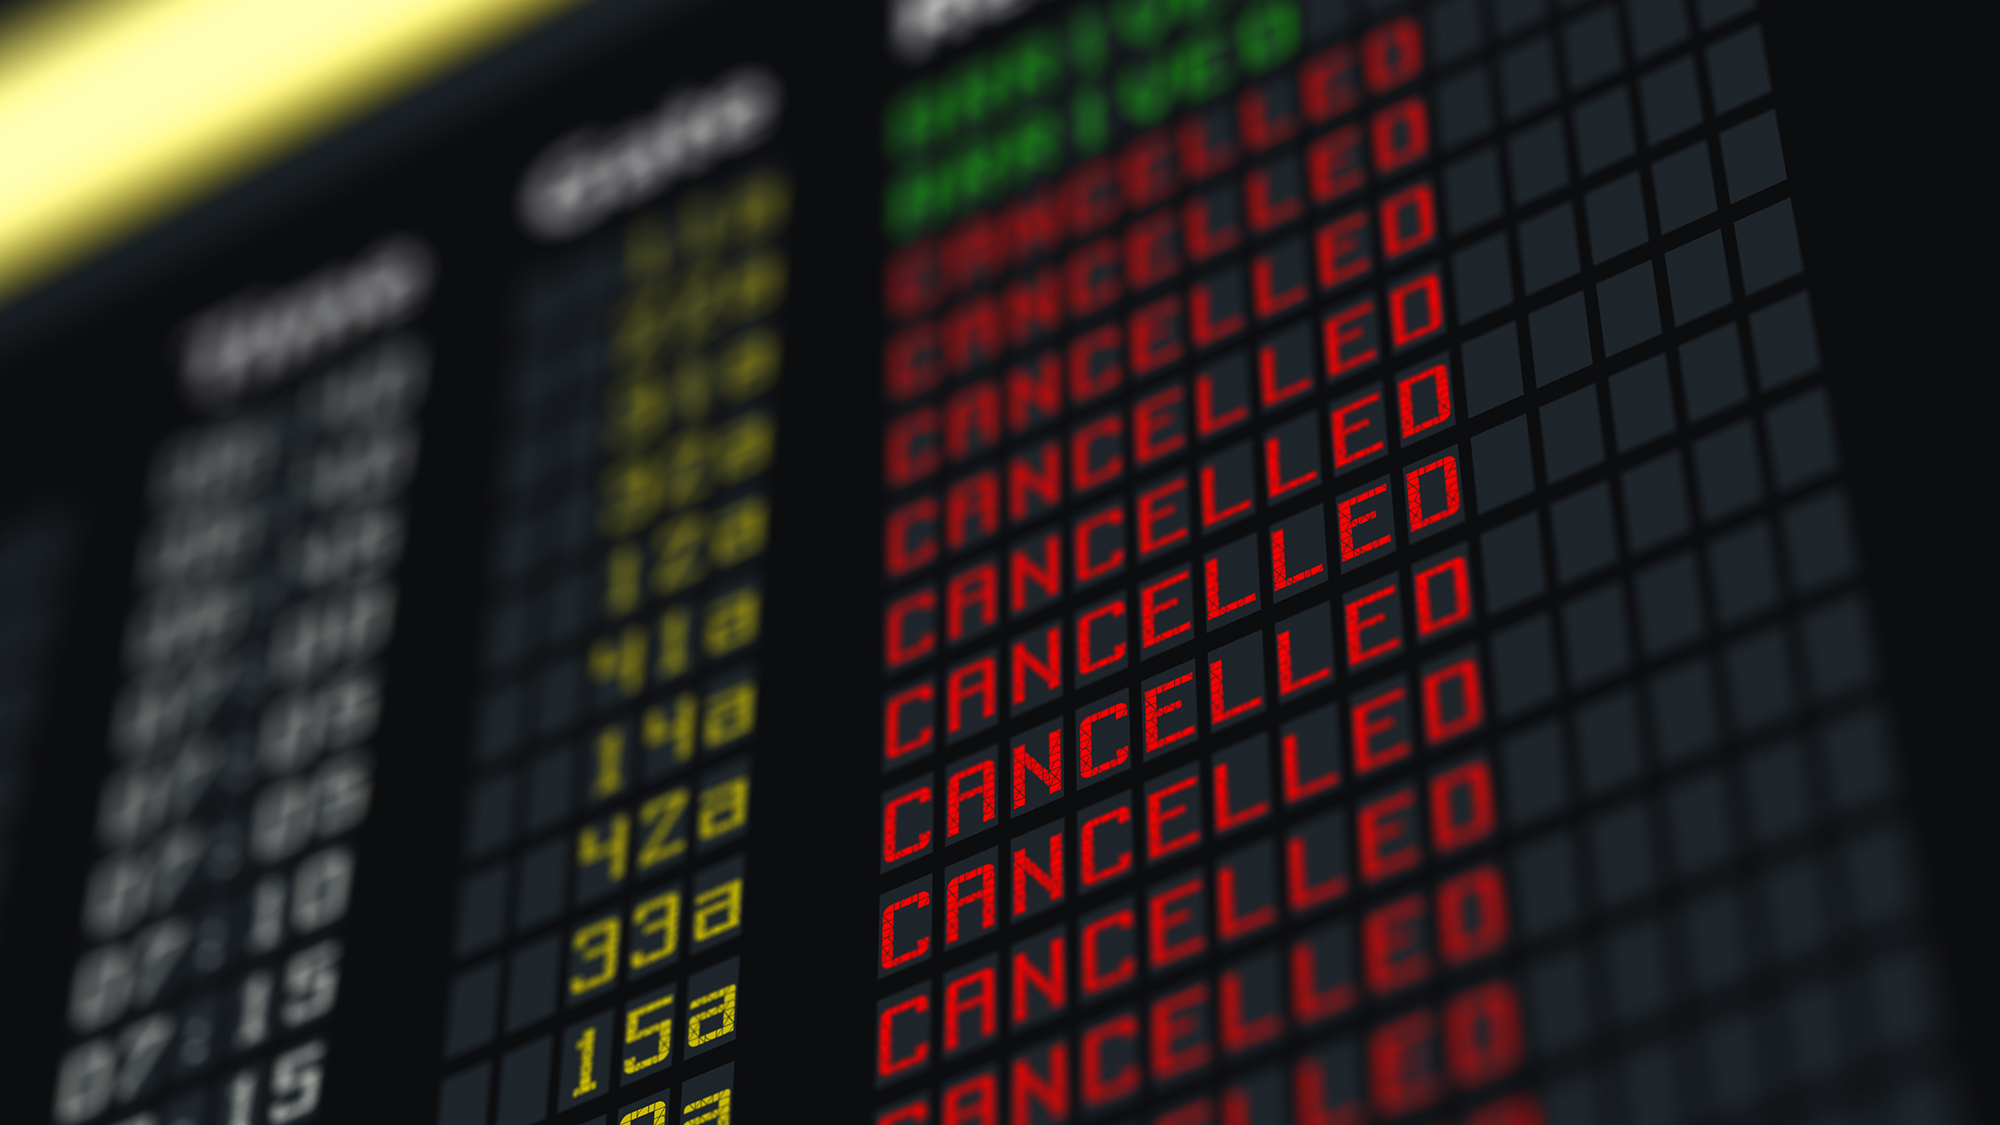 Cancelled flights on airport screen. (Image: Shutterstock)